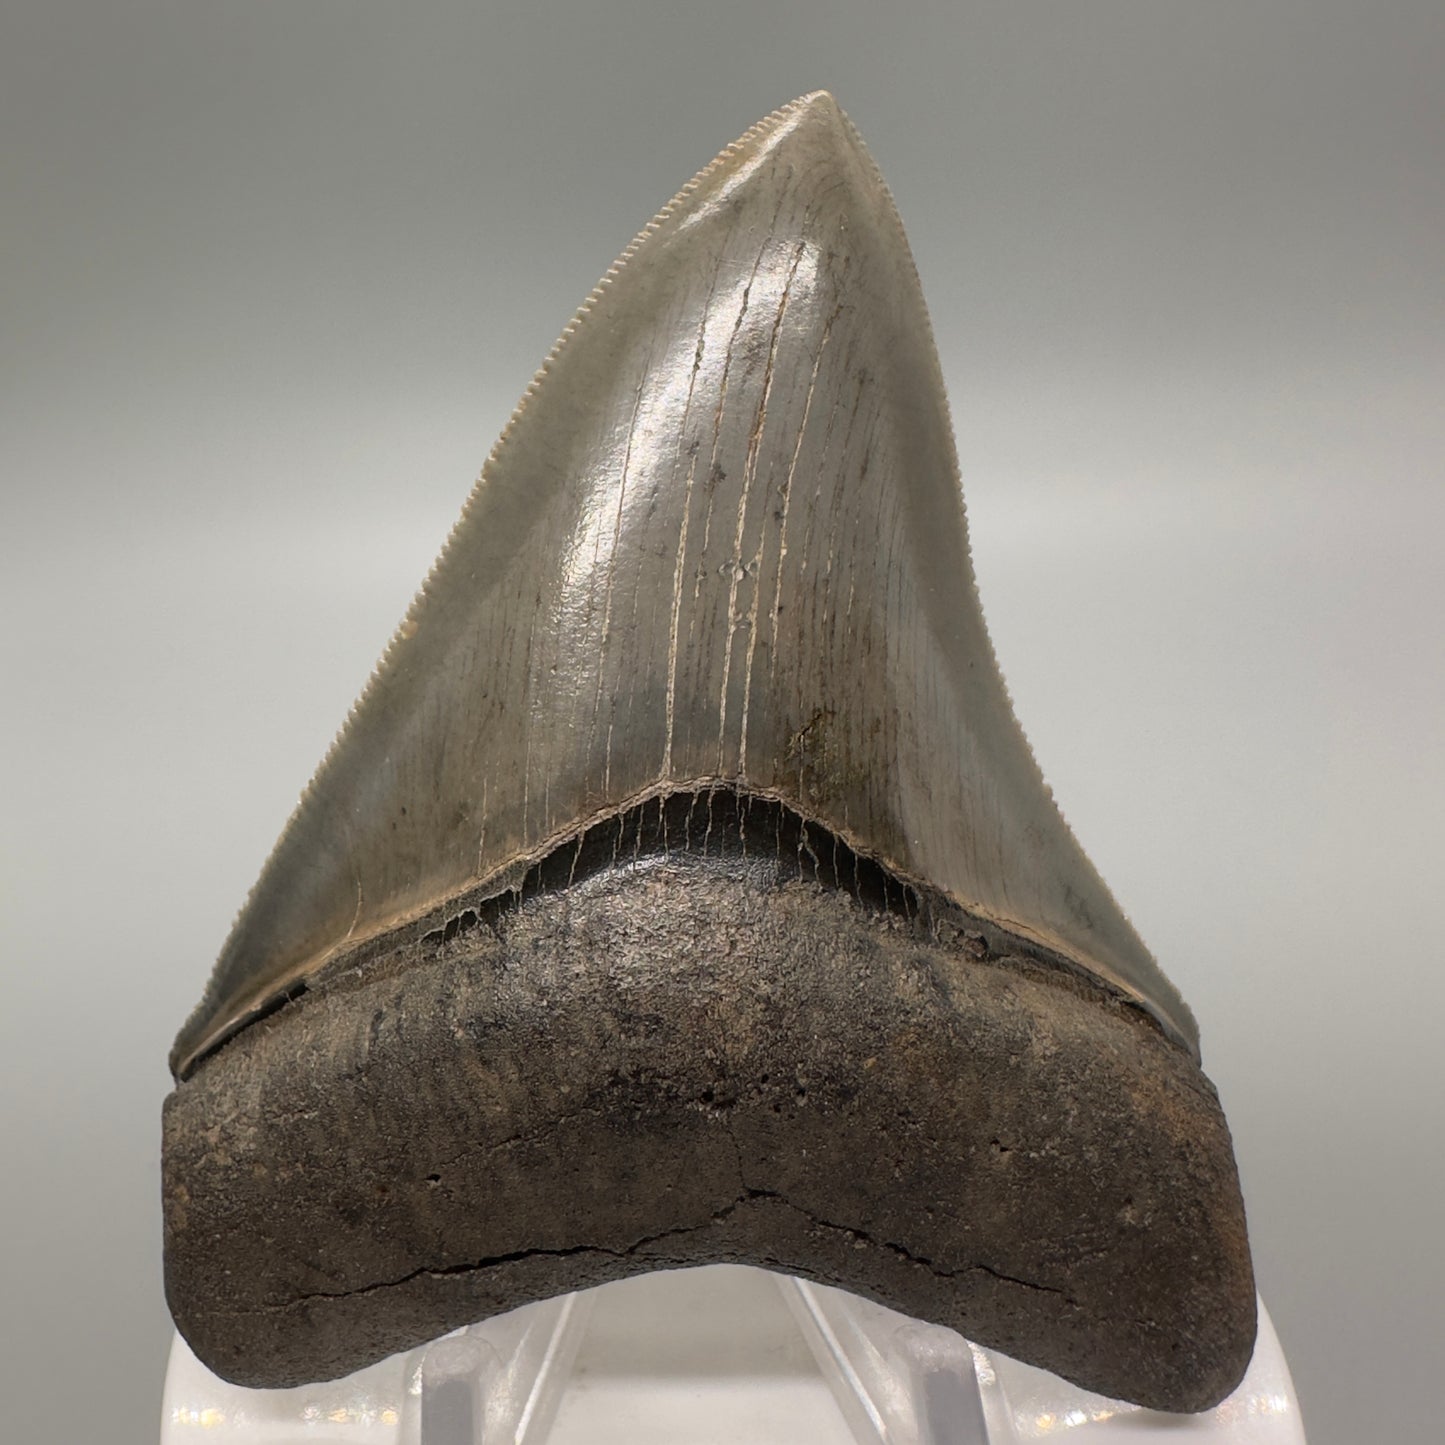 Sharply serrated 3.41" Fossil Megalodon Tooth: Scuba Diving Discovery from Georgia CM4609 - Front